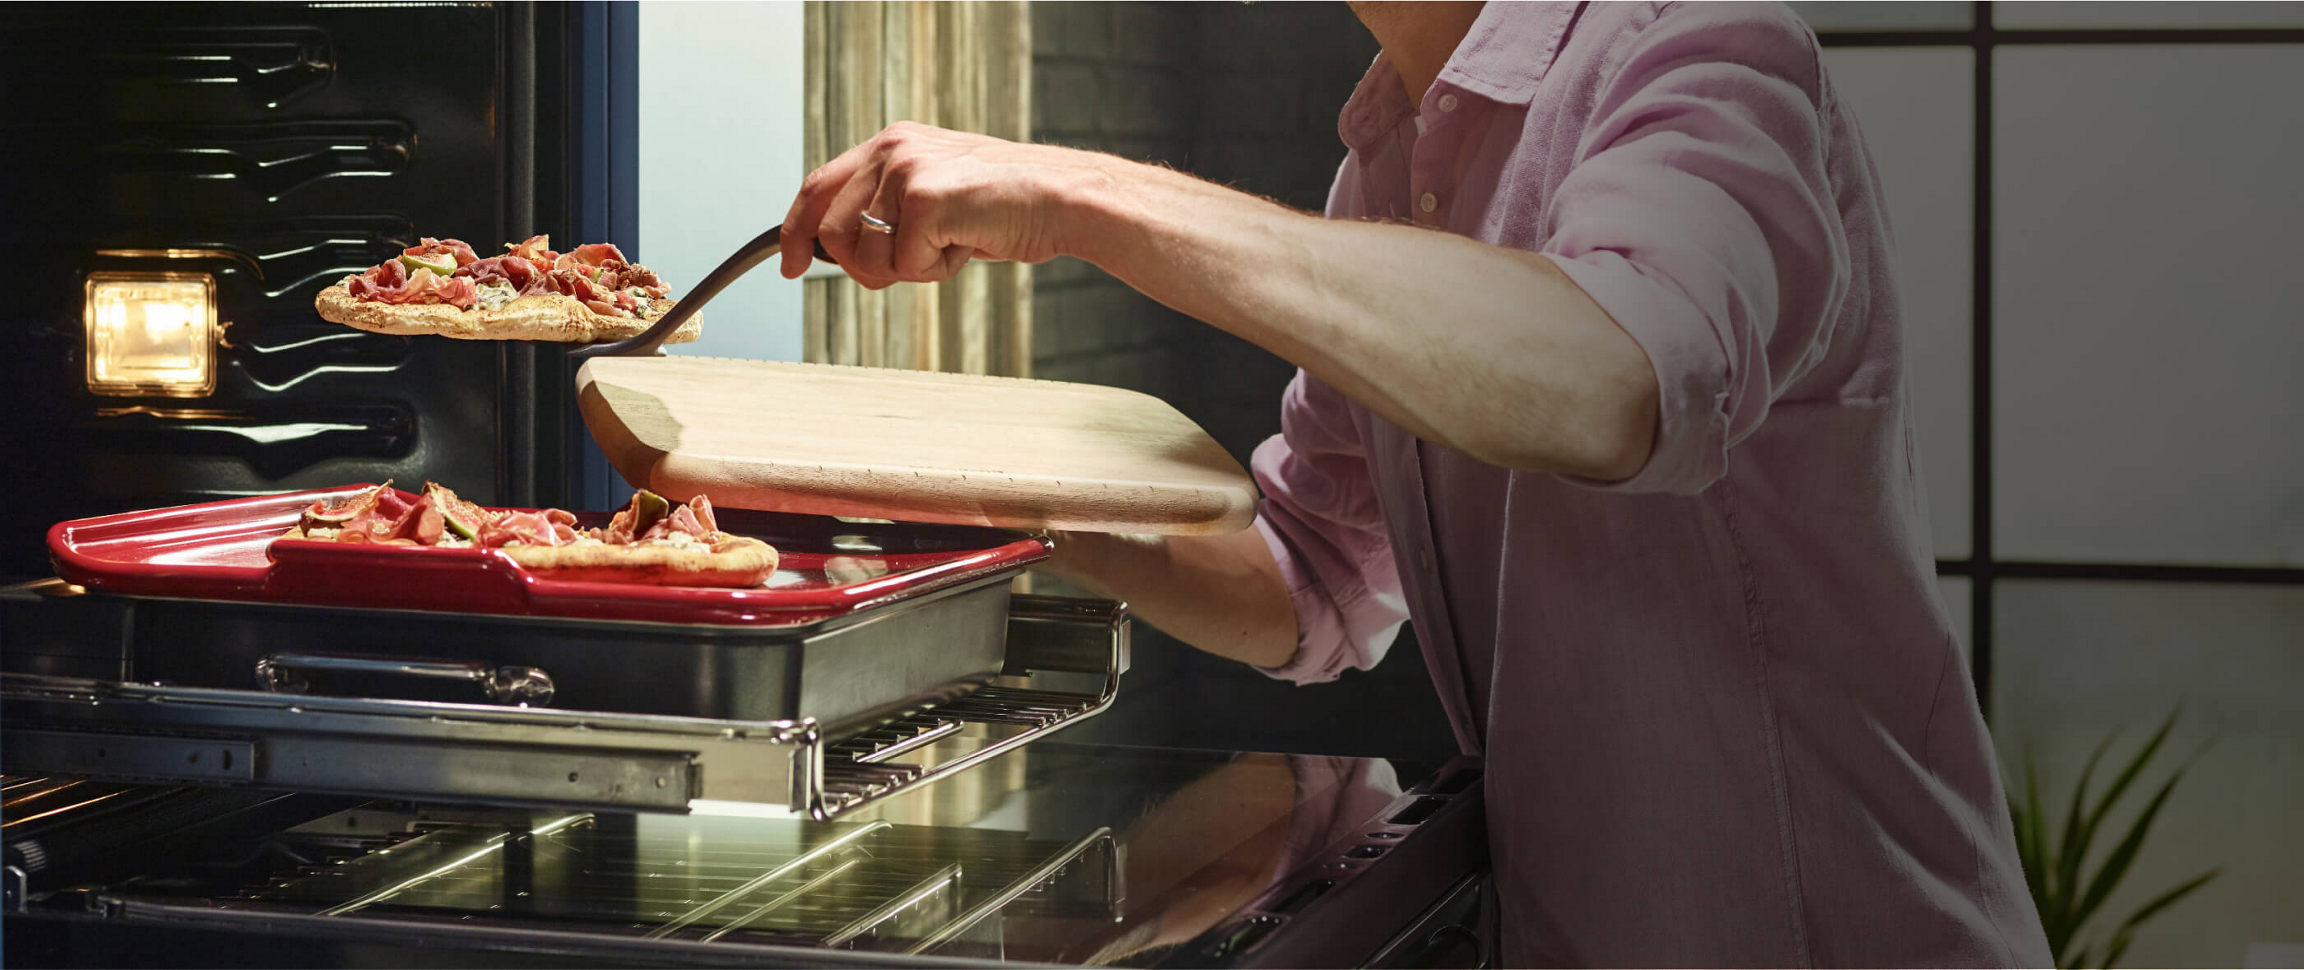 A Smart Oven Plus, open with the pizza stone attachment slid forward. A Maker transfers one of two gourmet pizza onto a cutting board for service.